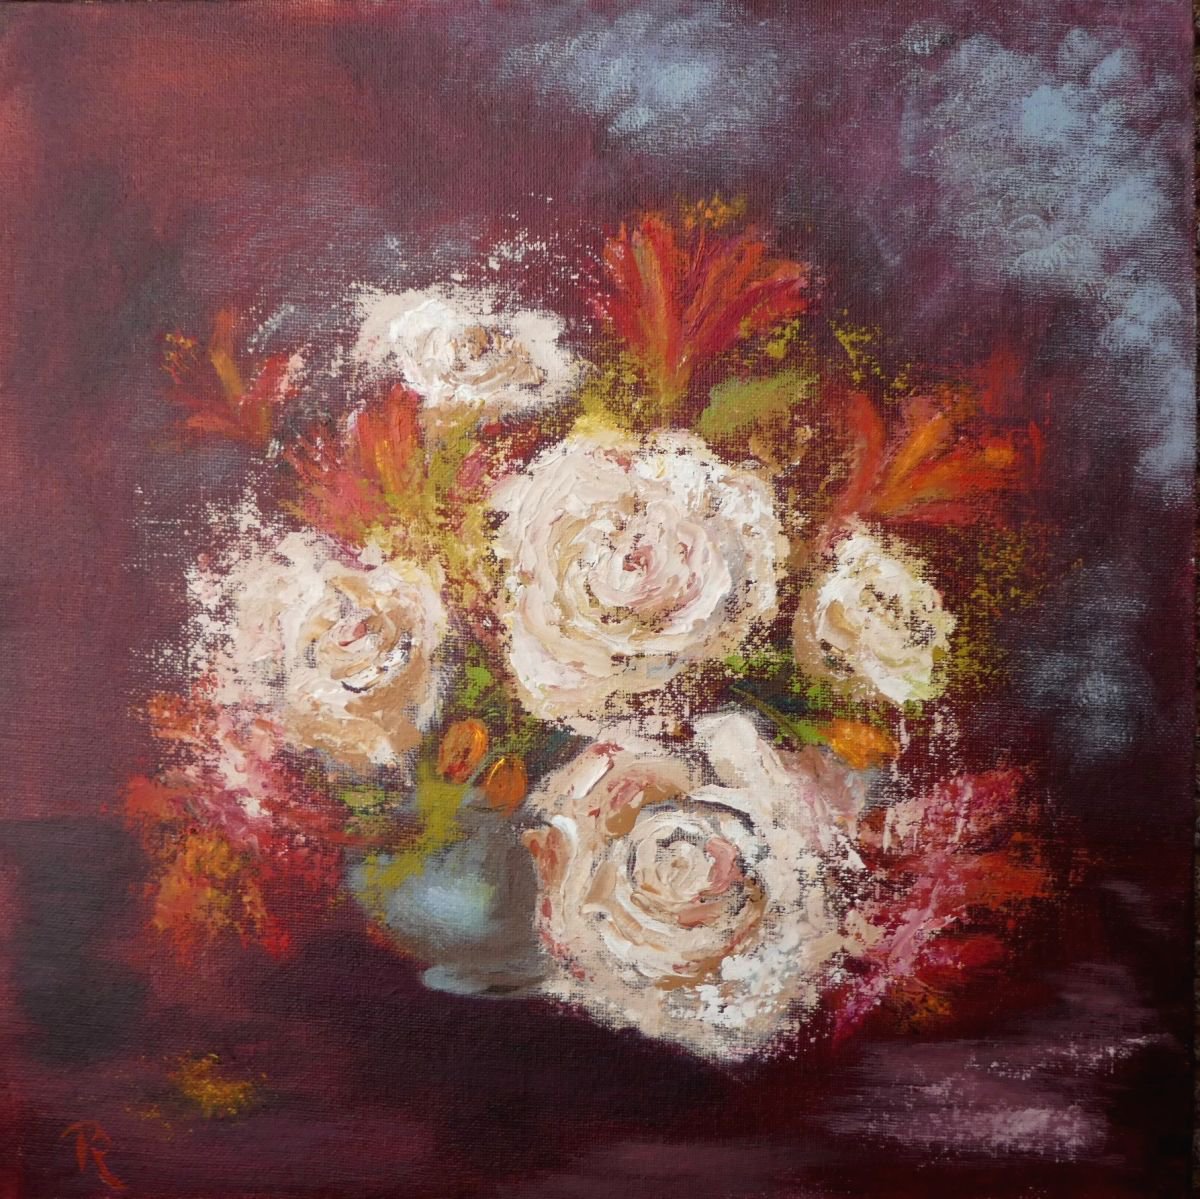 The Rose Bouquet Impressionist Flowers / Still Life Autumn by Rebecca Pells